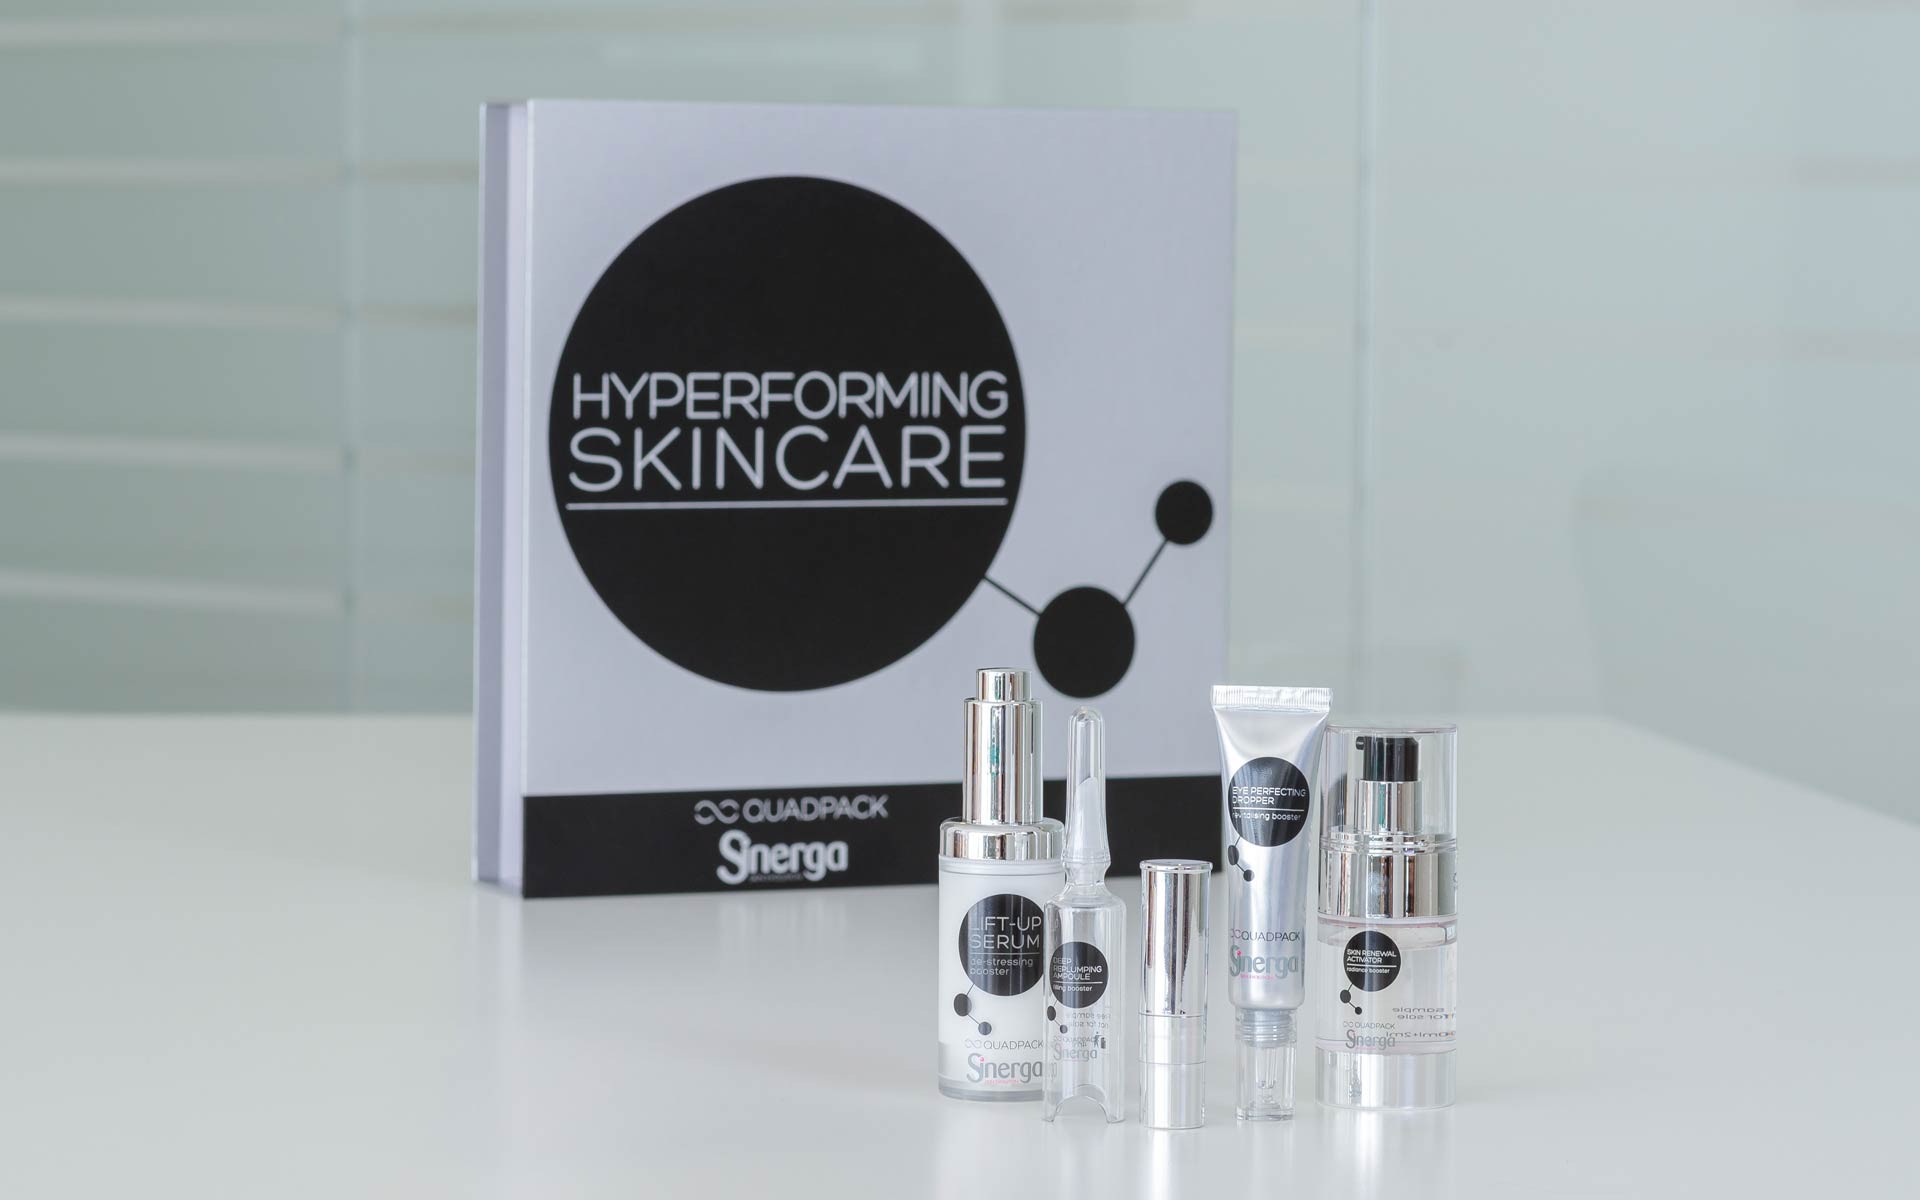 Sinerga and Quadpack - the world leader in packaging production and distribution for the beauty industry combine decades of expertise and know-how in an innovative full service that caters to the cosmetic, dermocosmetics and dermo-pharmaceutical industry.